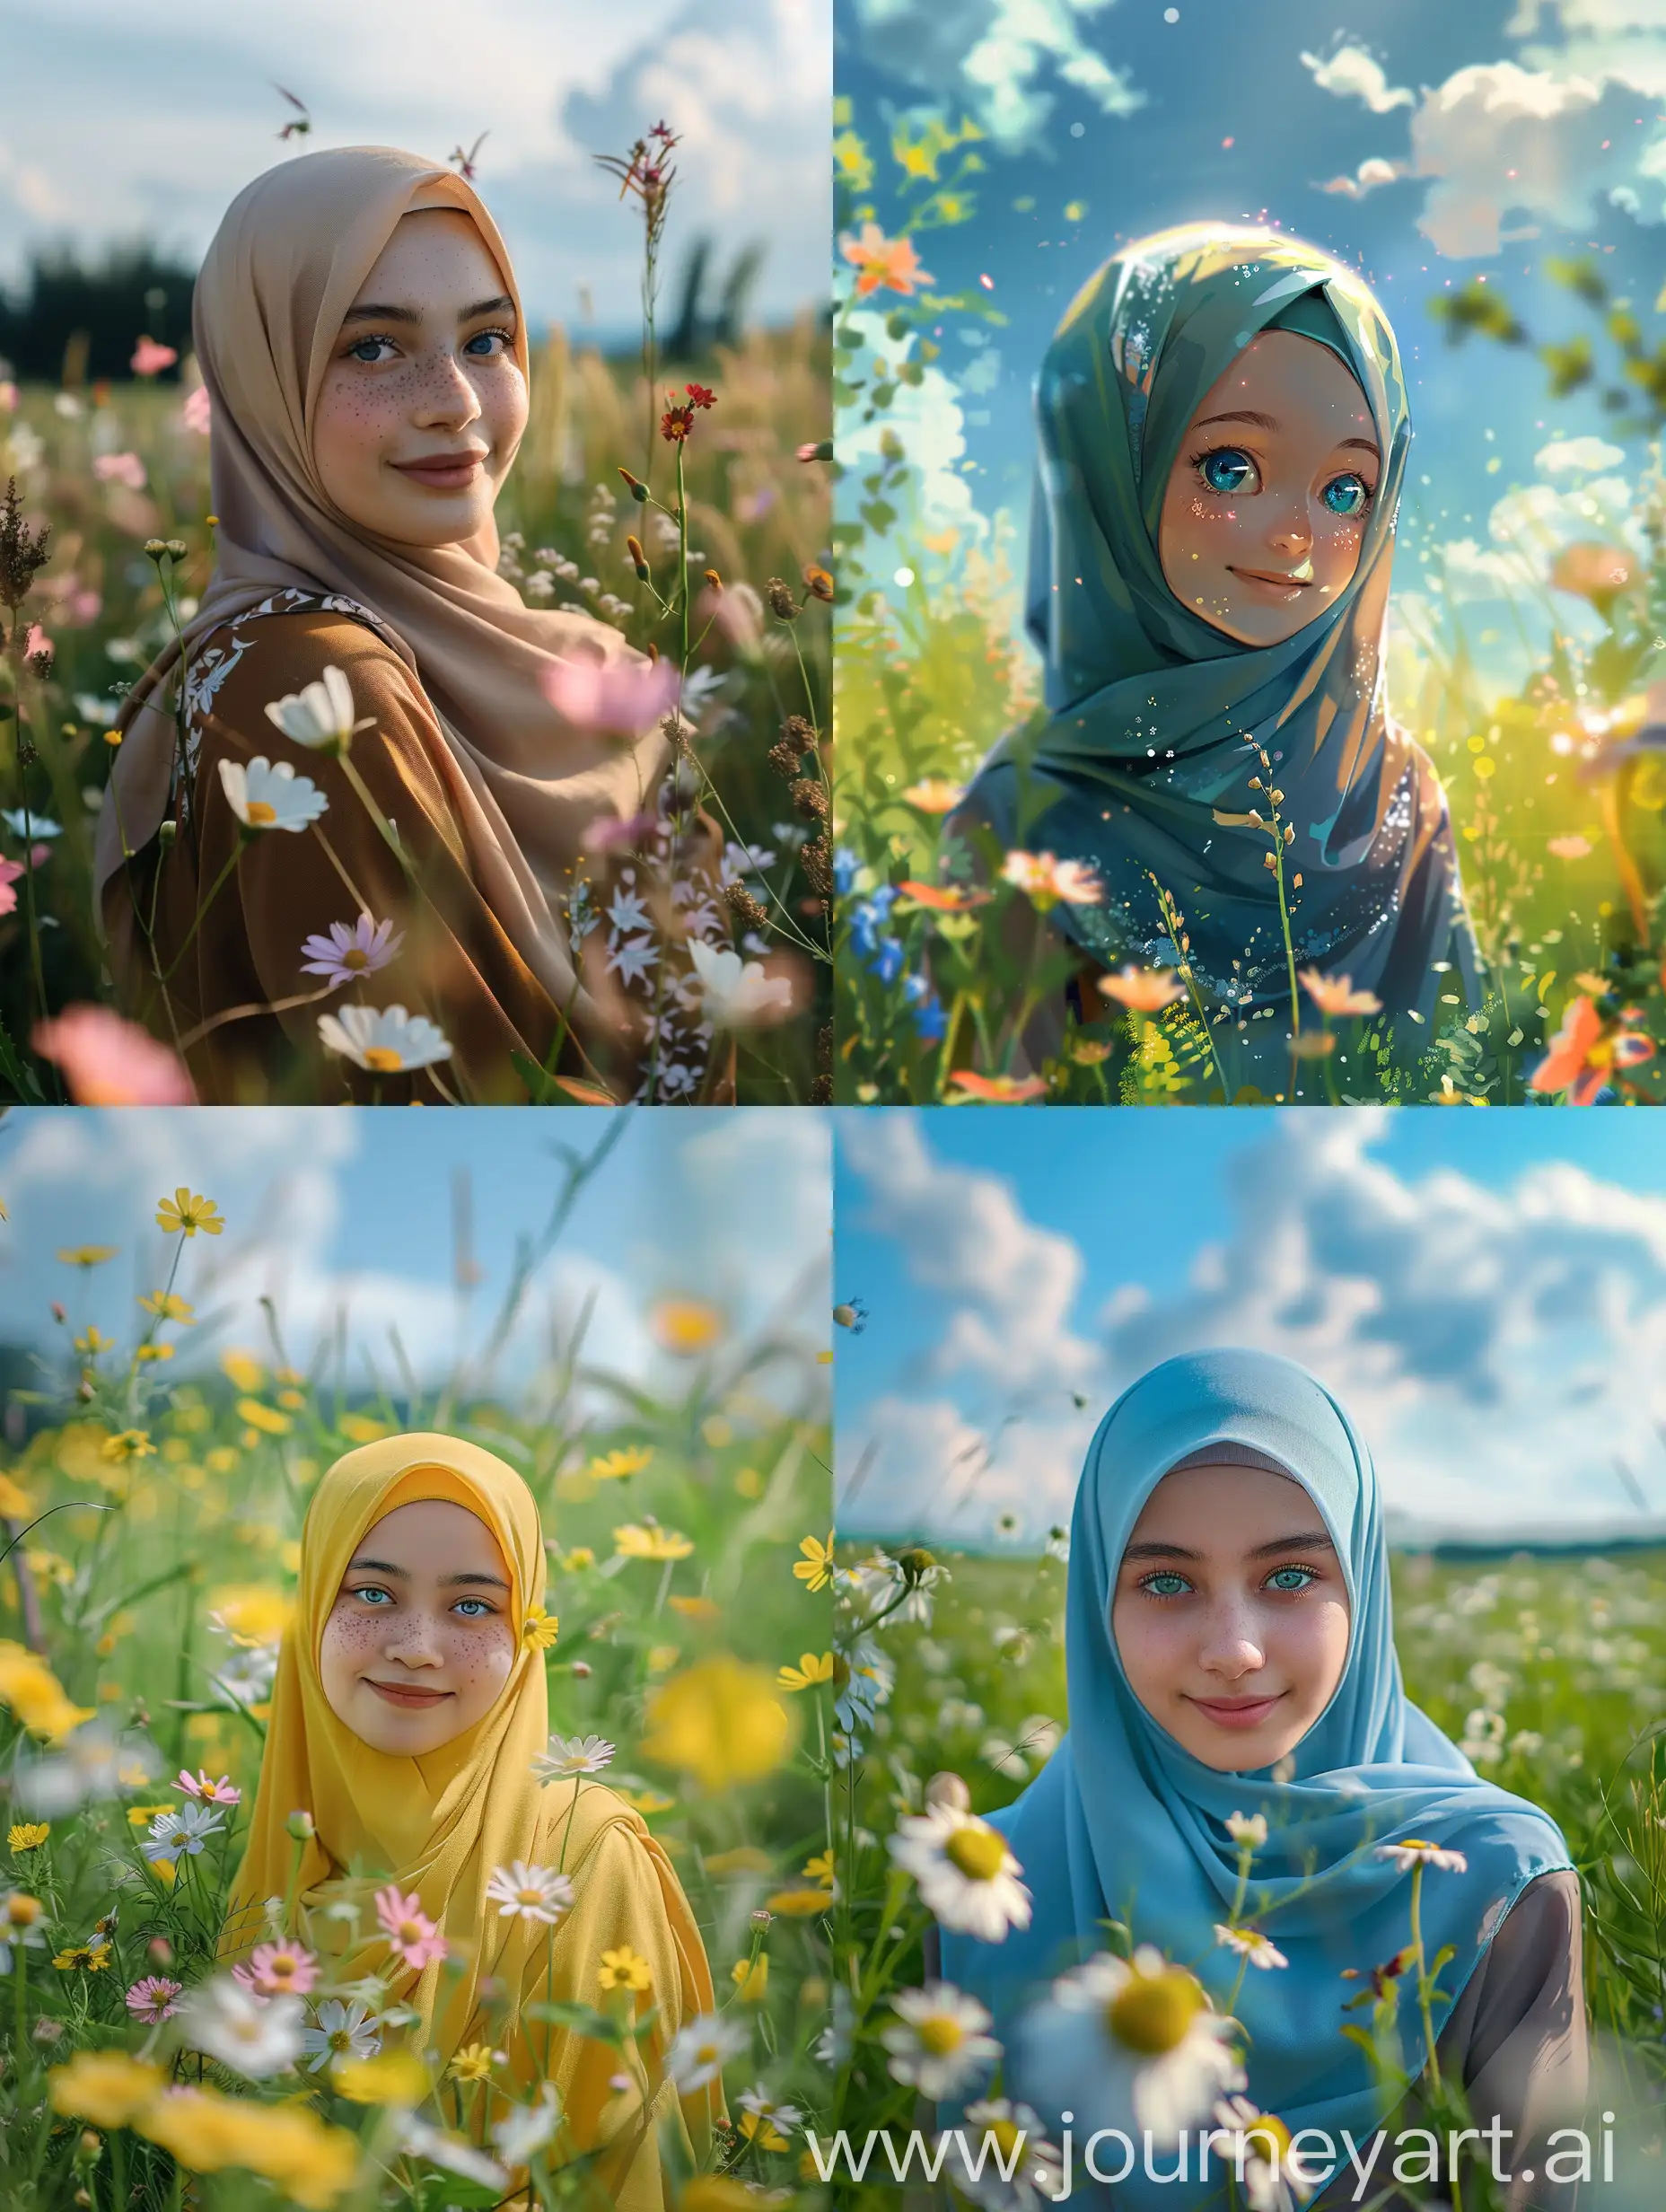 Smiling-Indonesian-Girl-in-Hijab-Standing-in-Beautiful-Field-with-Flowers